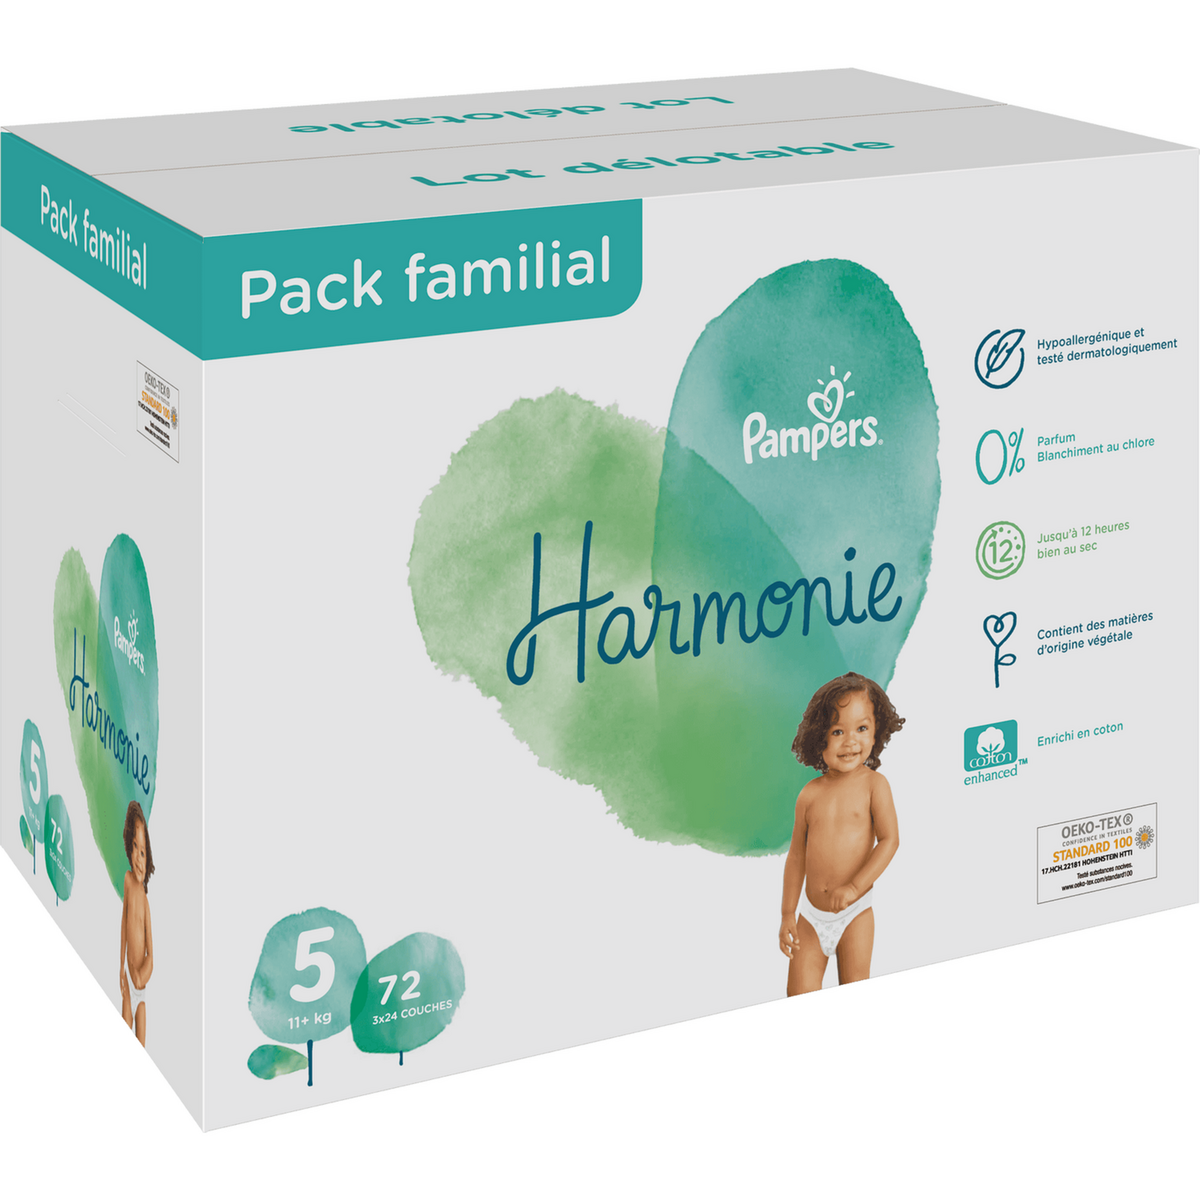 PAMPERS Harmonie Couches Taille 5 72 couches